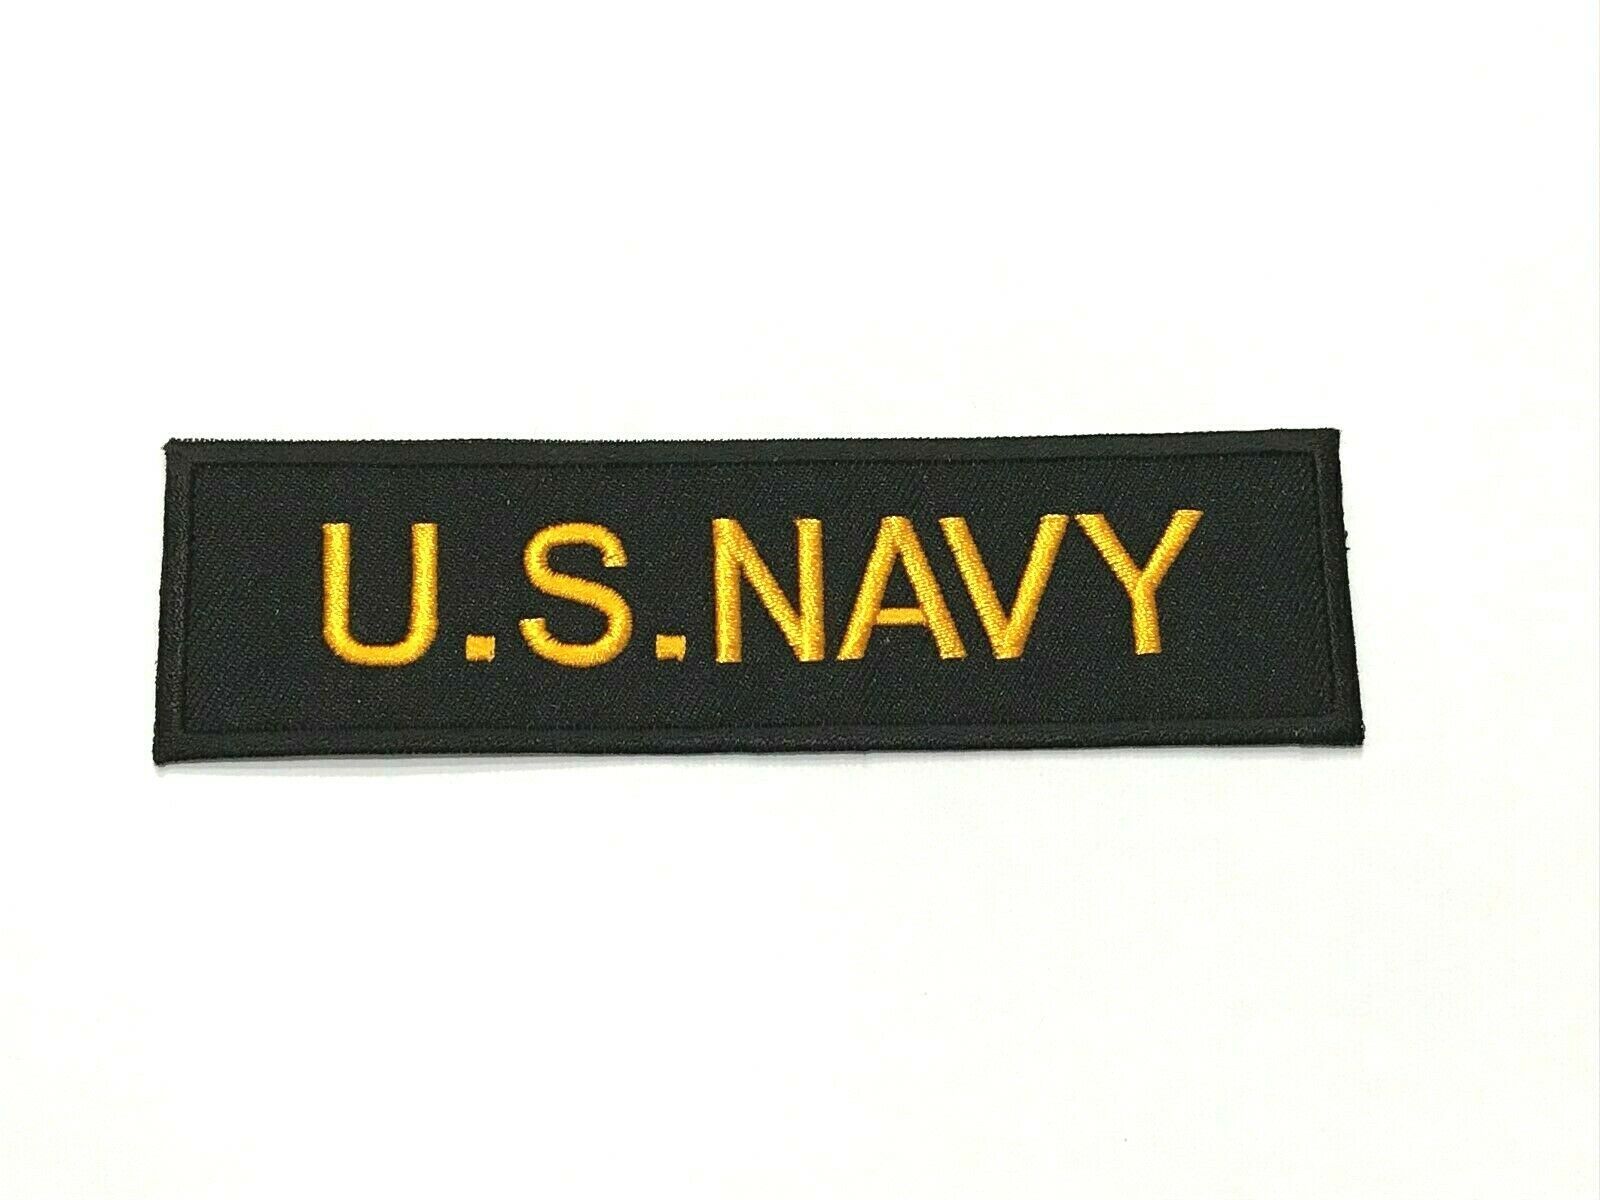 Primary image for US Navy Seal Combat Uniform Logo Patches United Stated Fleet 5" Badge Arm Shirt